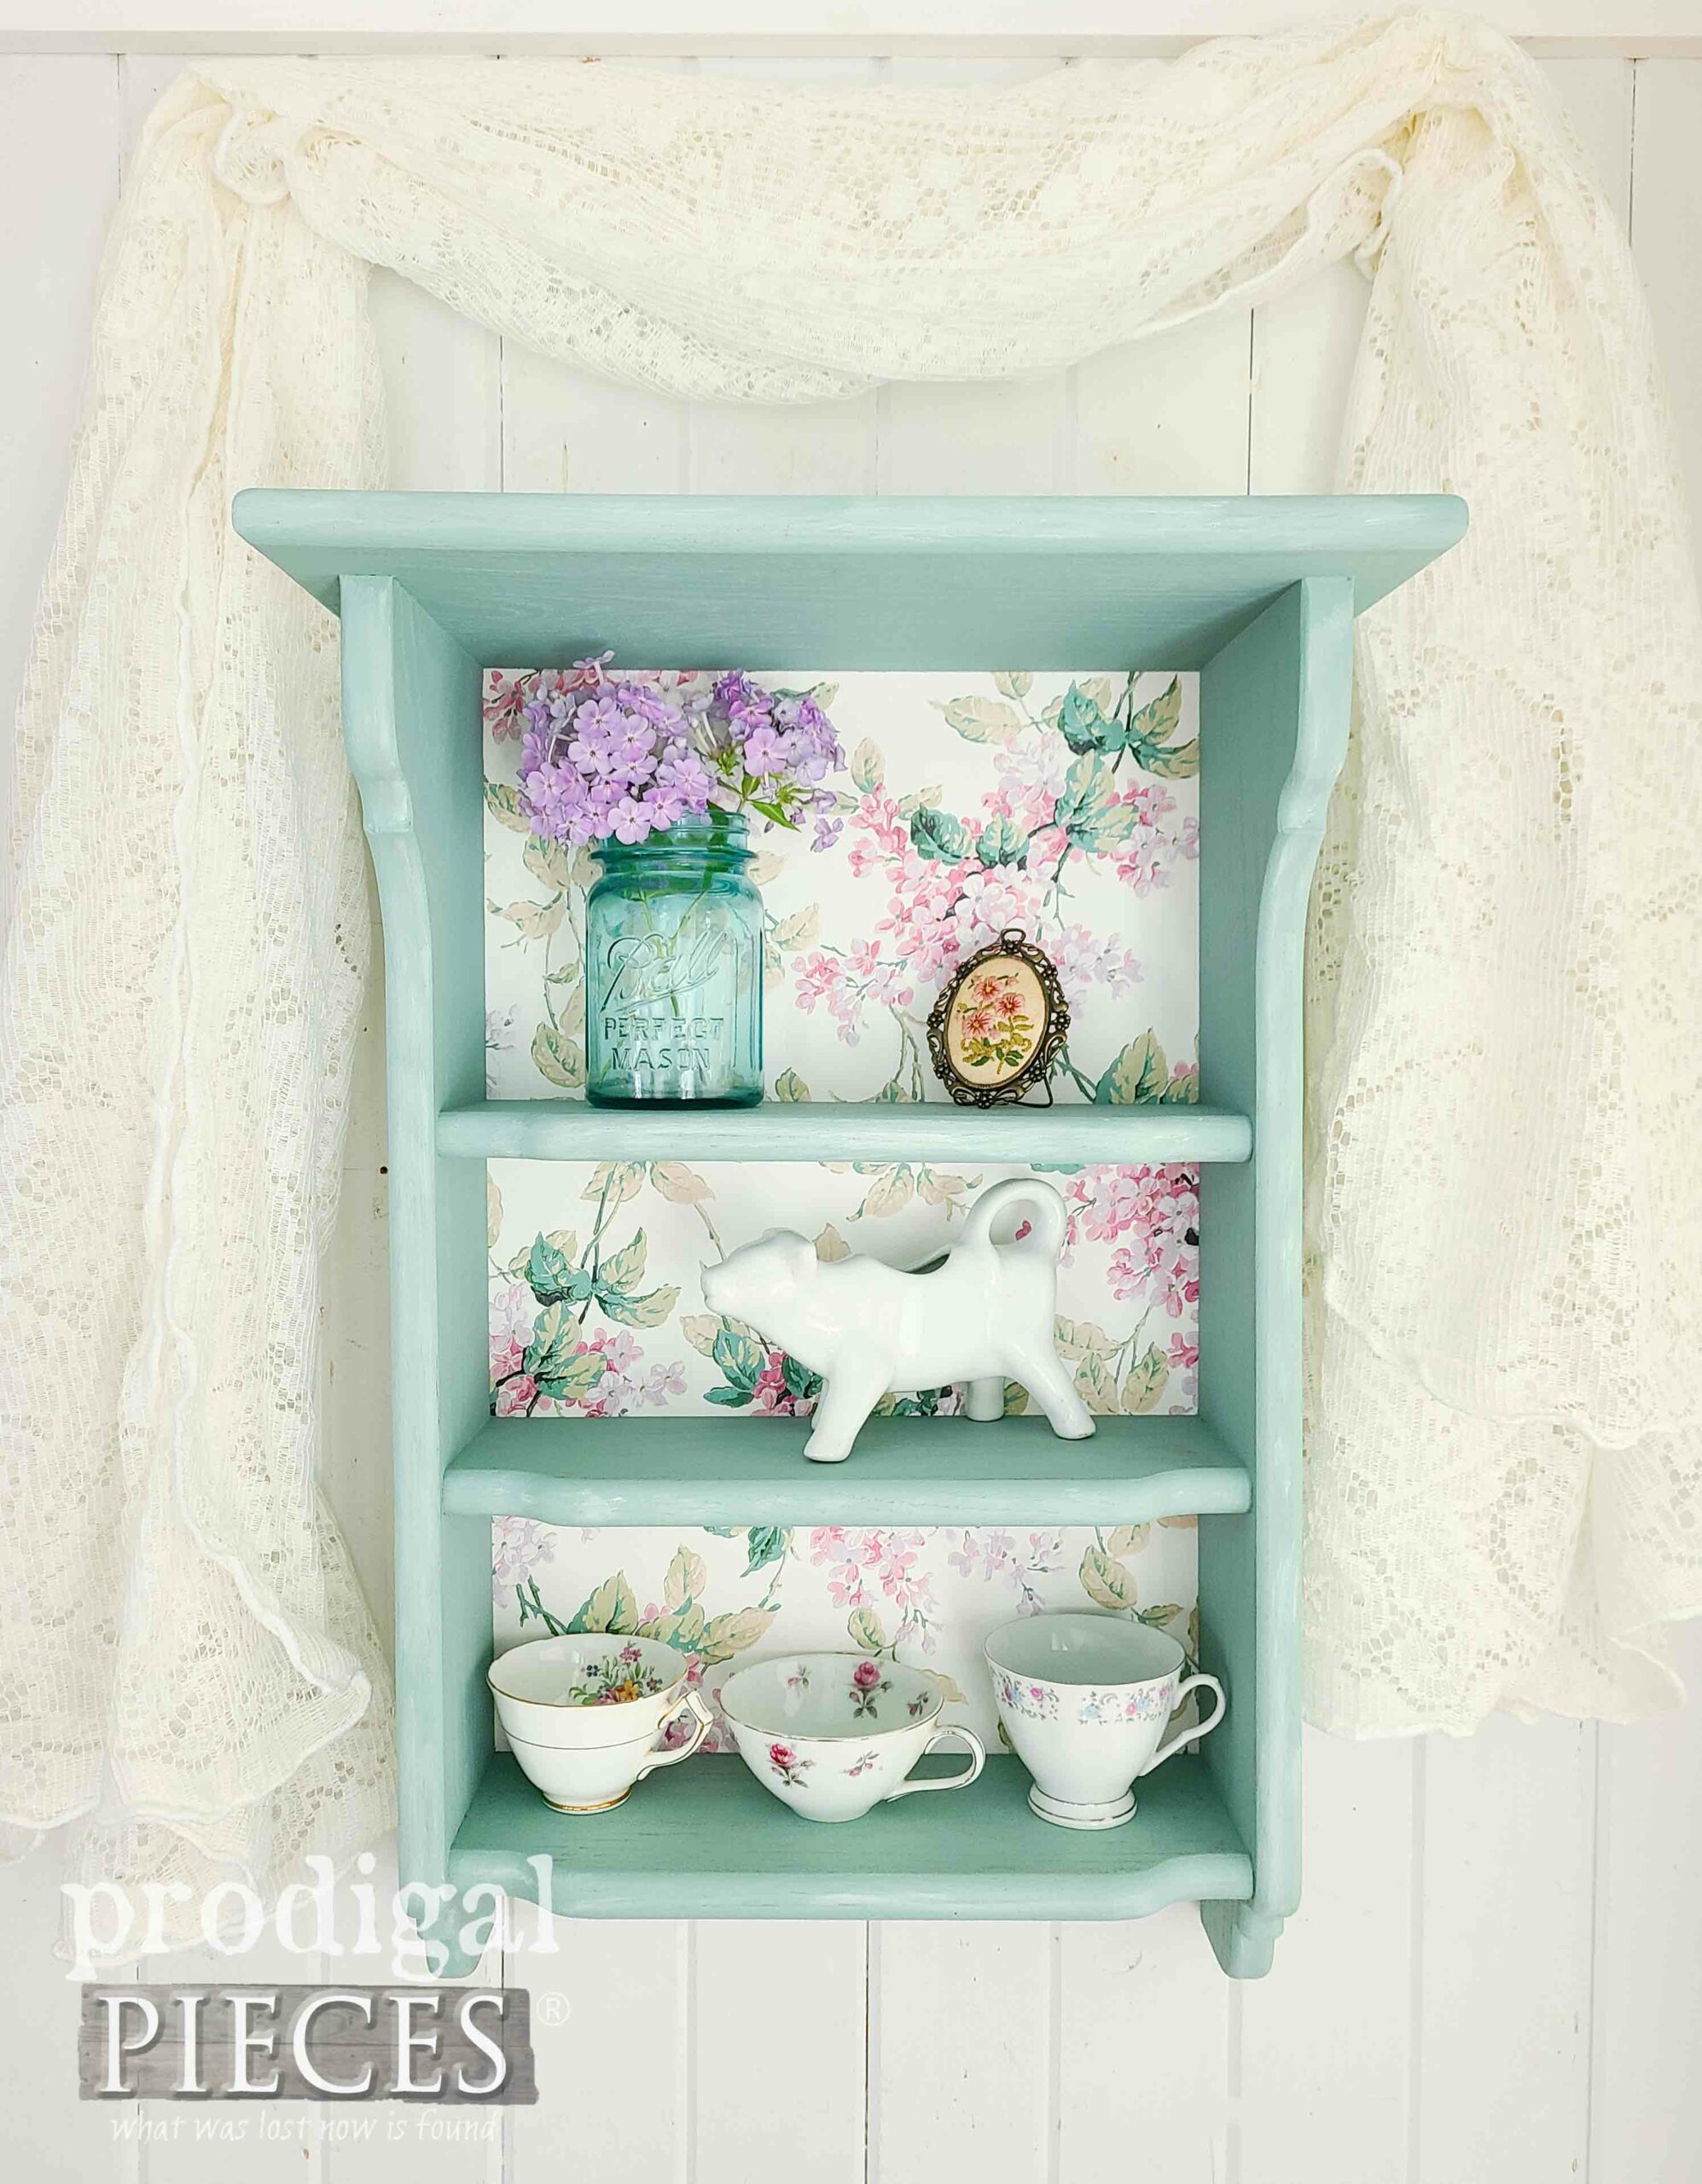 Thrifted Heart Cutout Shelf Makeover with Milk Paint by Larissa of Prodigal Pieces | prodigalpieces.com #prodigalpieces